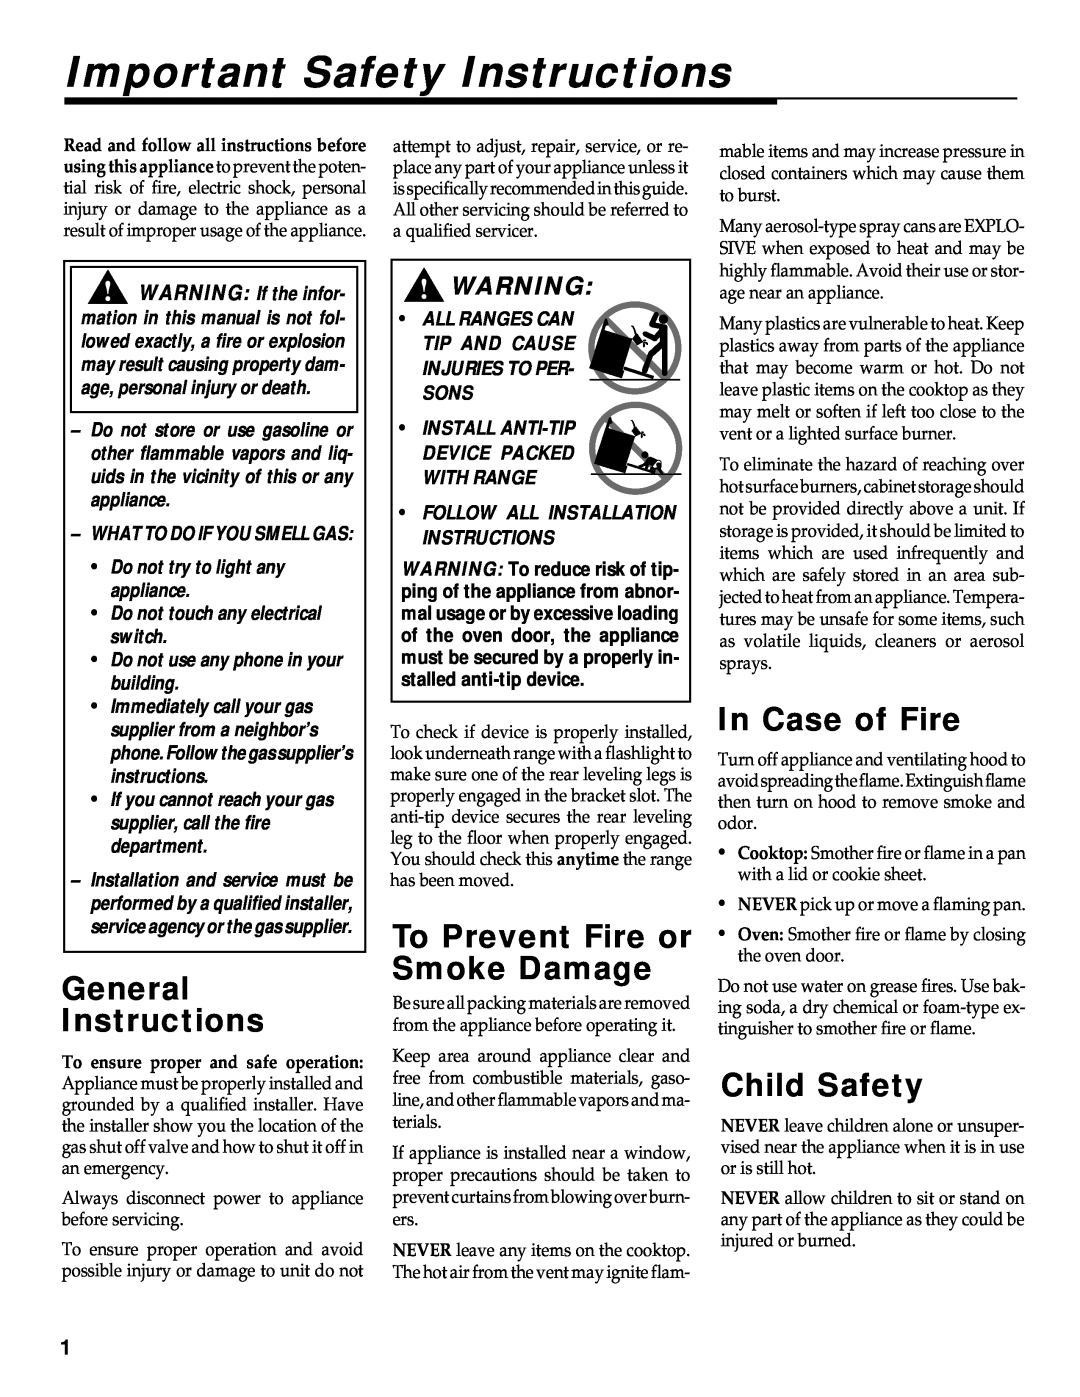 Maytag RS-1 manual Important Safety Instructions, General Instructions, To Prevent Fire or Smoke Damage, In Case of Fire 